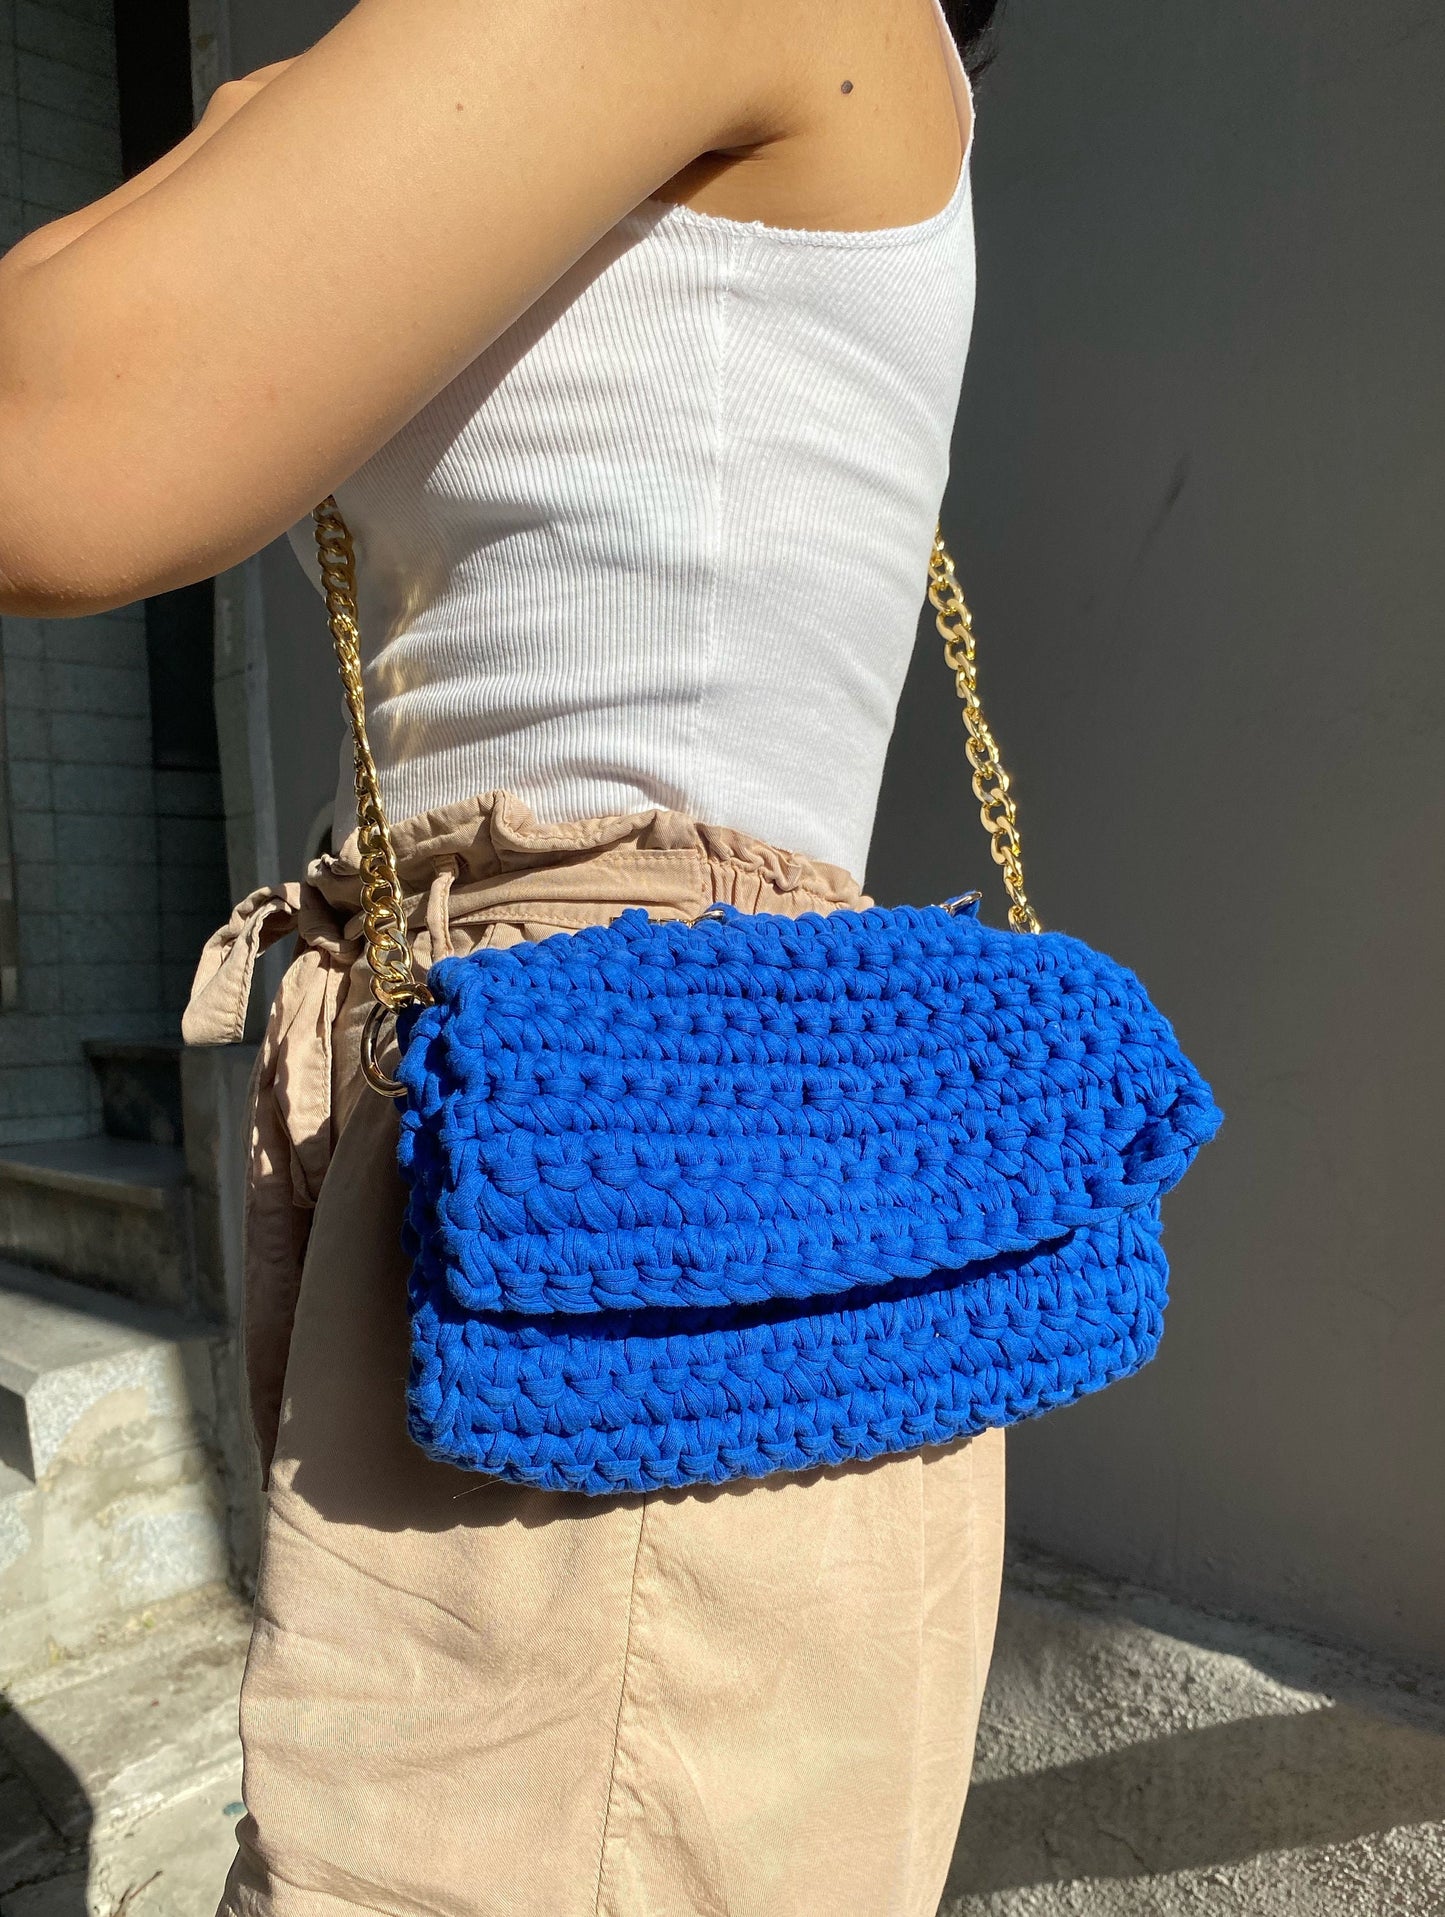 Chunky Crochet Cross Body Bag, Chic Envelope Purse Design,Messenger Bag with Gold Chain Leather Straps